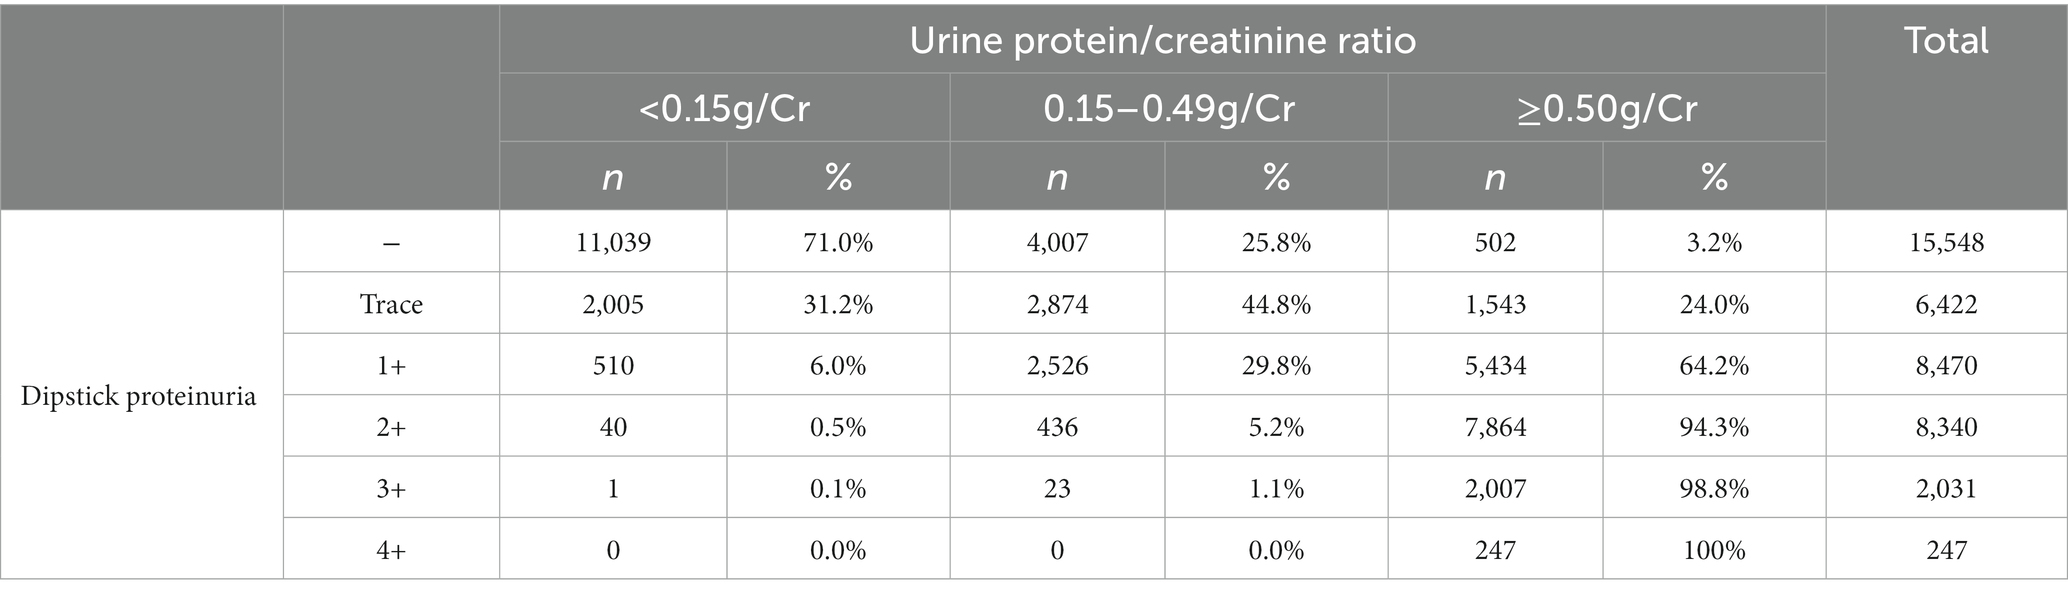 Frontiers Sex Differences In The Evaluation Of Proteinuria Using The Urine Dipstick Test 2650